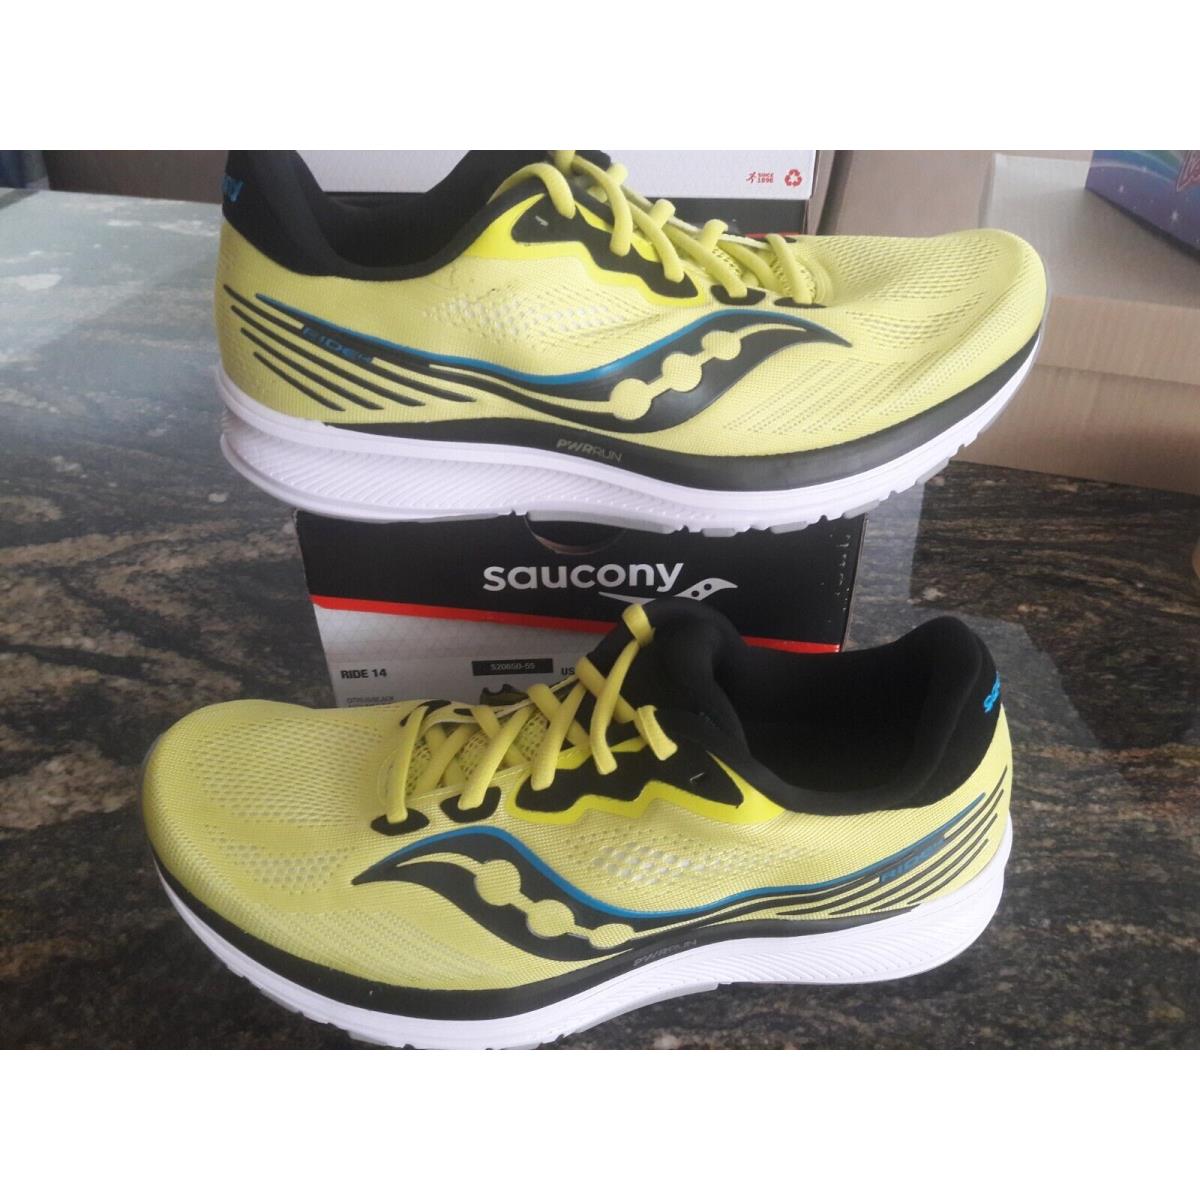 Mens Saucony Ride 14 Running Shoes Size 11